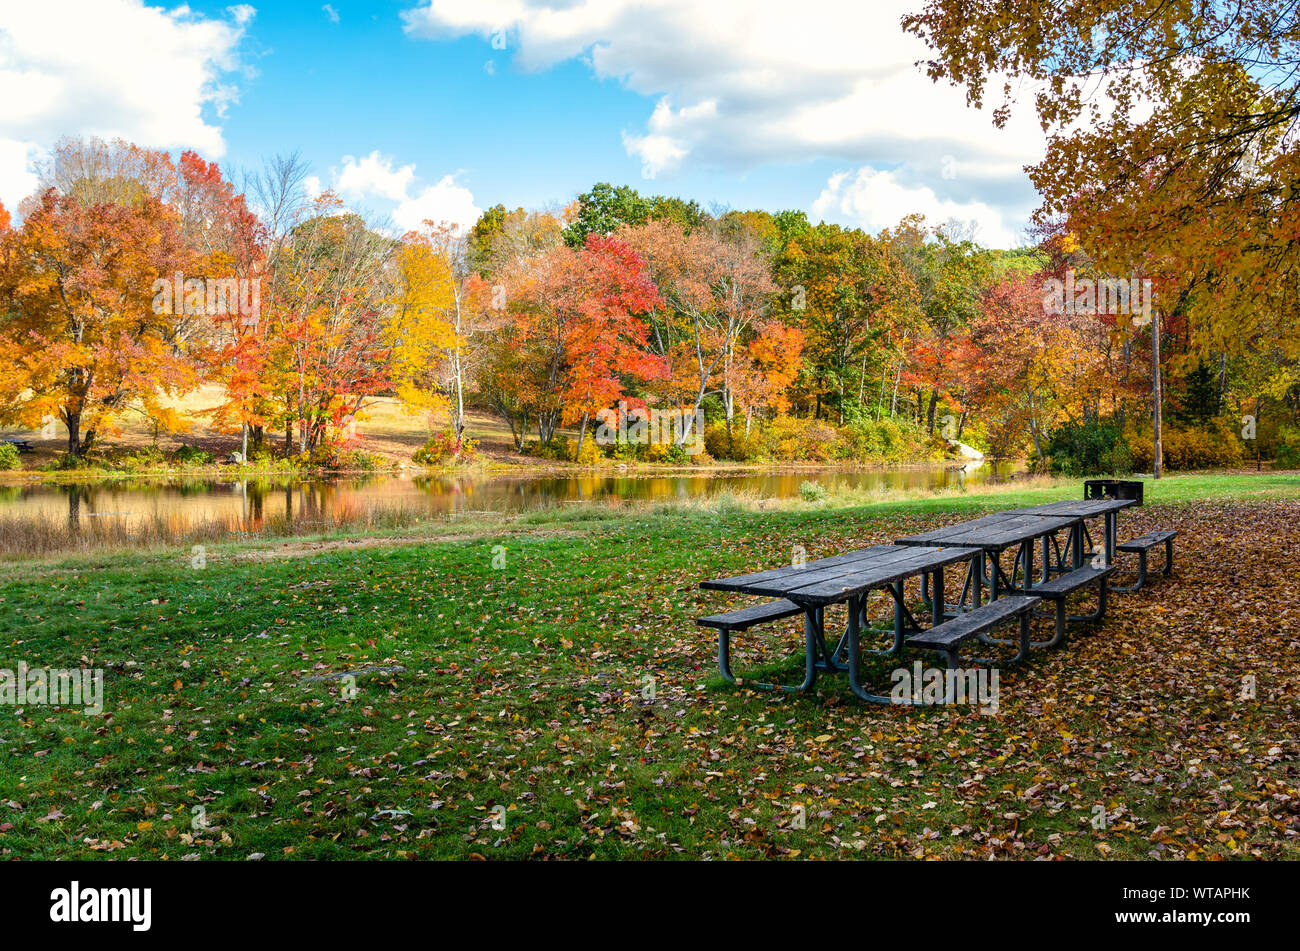 Wicnic tables and BBQ on a riverside meadow covered in fallen leaves on a sunny autumn day. Colourful trees line the river. Stock Photo